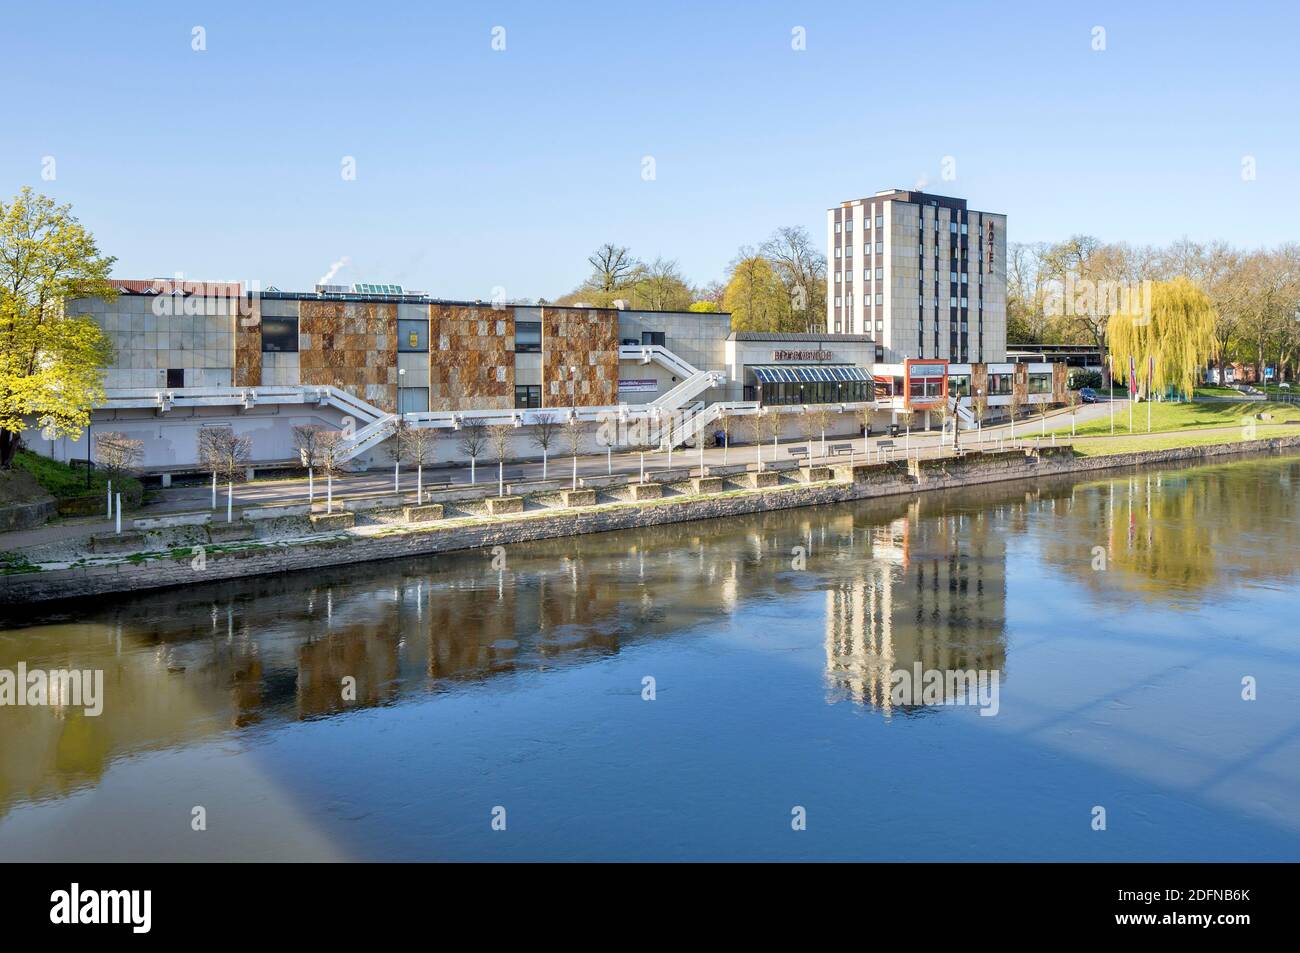 Brueckentor, culture and event centre, city hall and hotel, Rinteln, Weserbergland, Lower Saxony, Germany Stock Photo